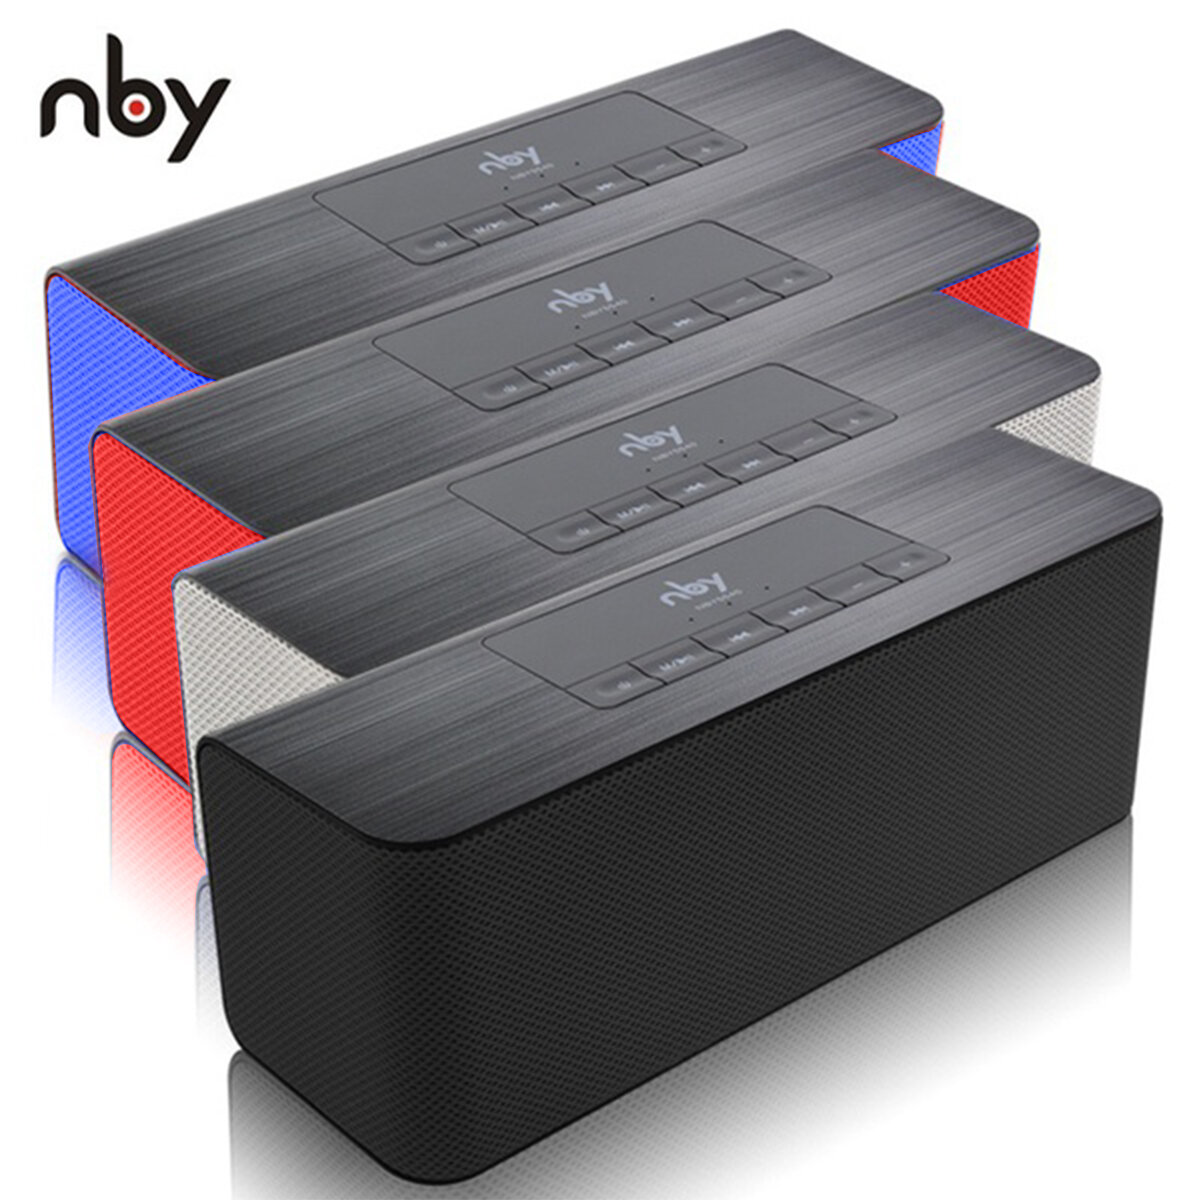 NBY 10W Wireless HiFi Bluetooth Speaker Bass Stereo Stereo Subwoofer AUX TF FM USB